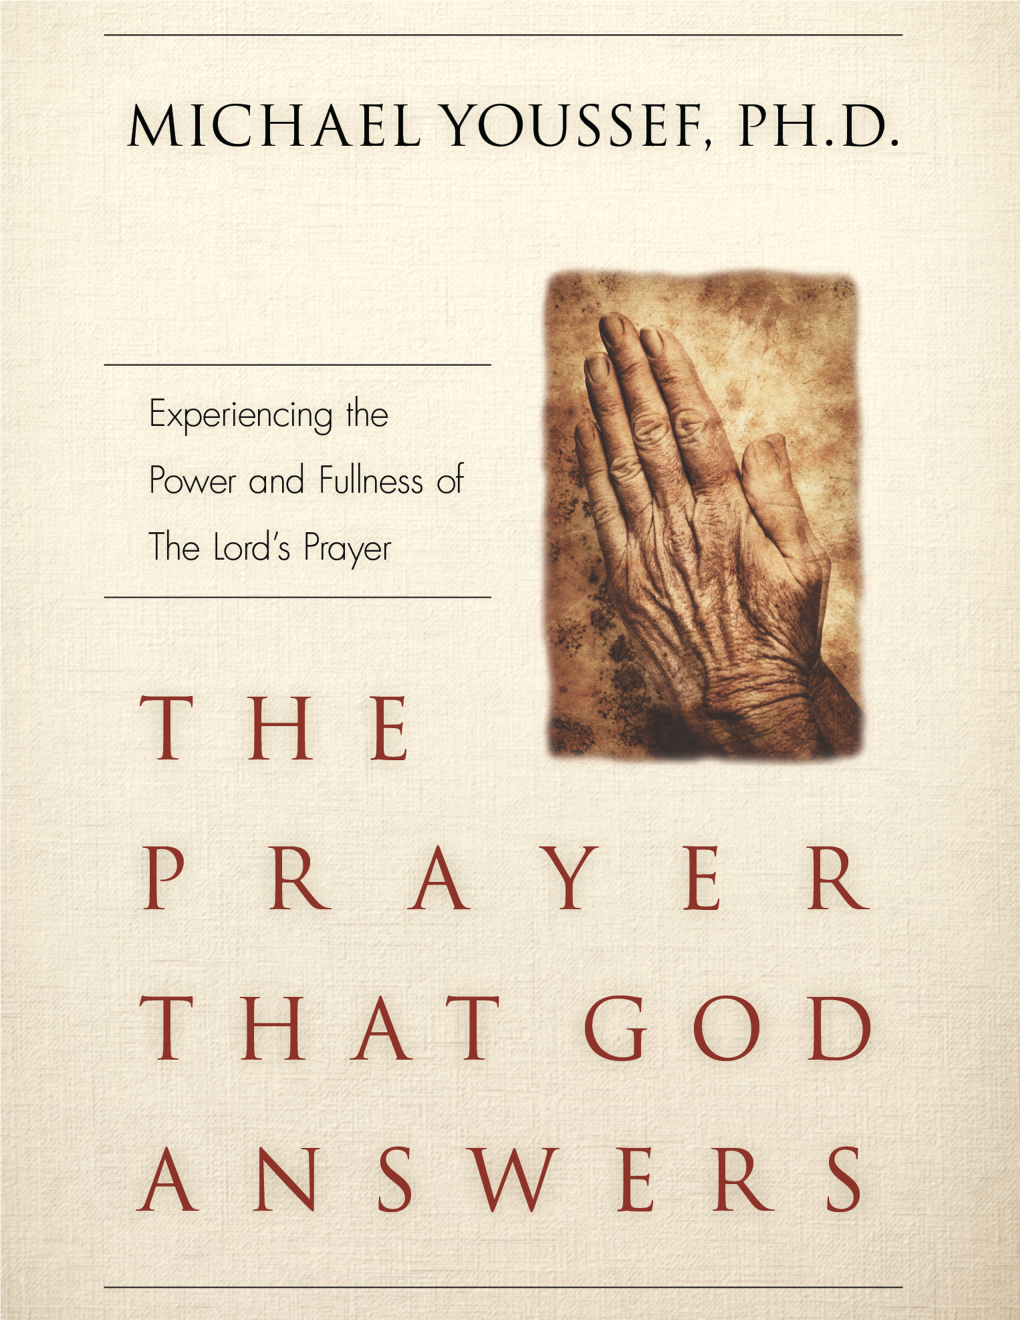 The Prayer That God Answers